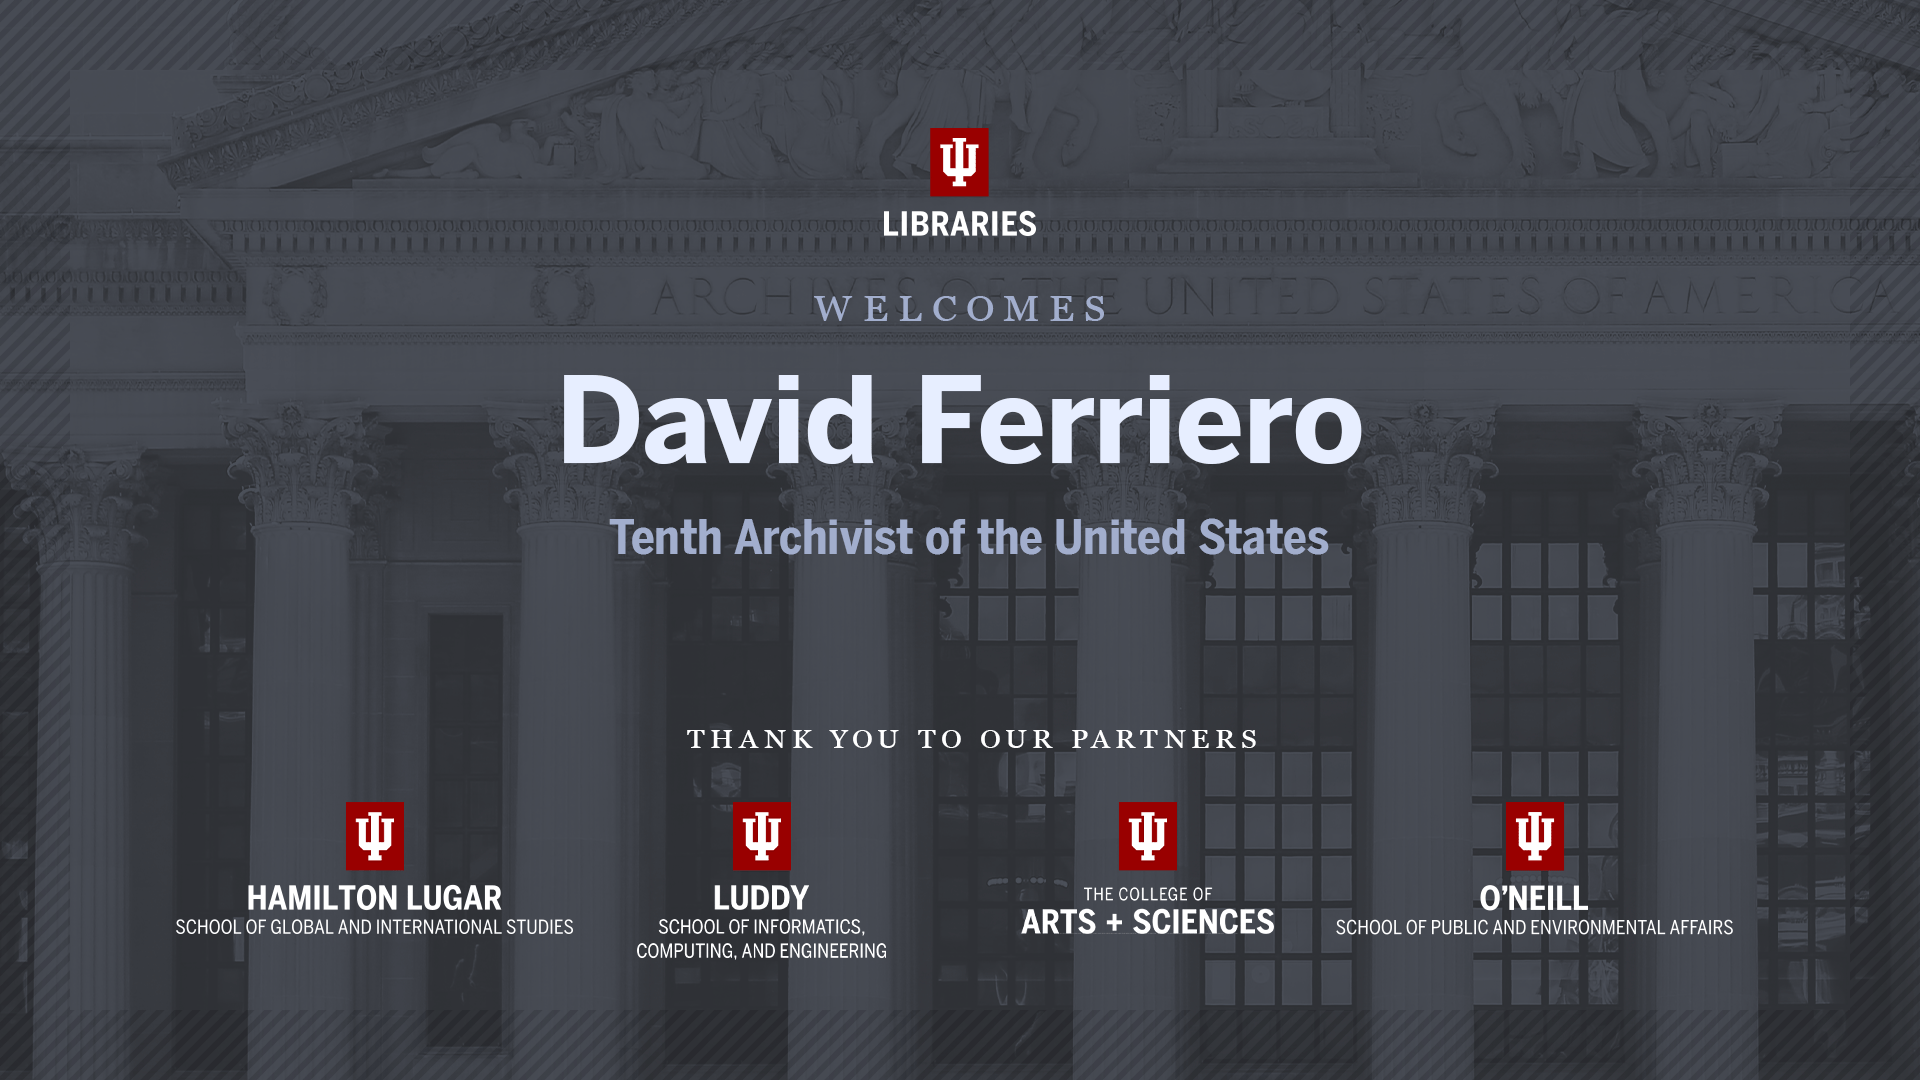 A graphic is presented to welcome David Ferriero, tenth archivist of the United States to Bloomington Indiana.  Several logos representing IU departments are featured on a dark governmental background image.